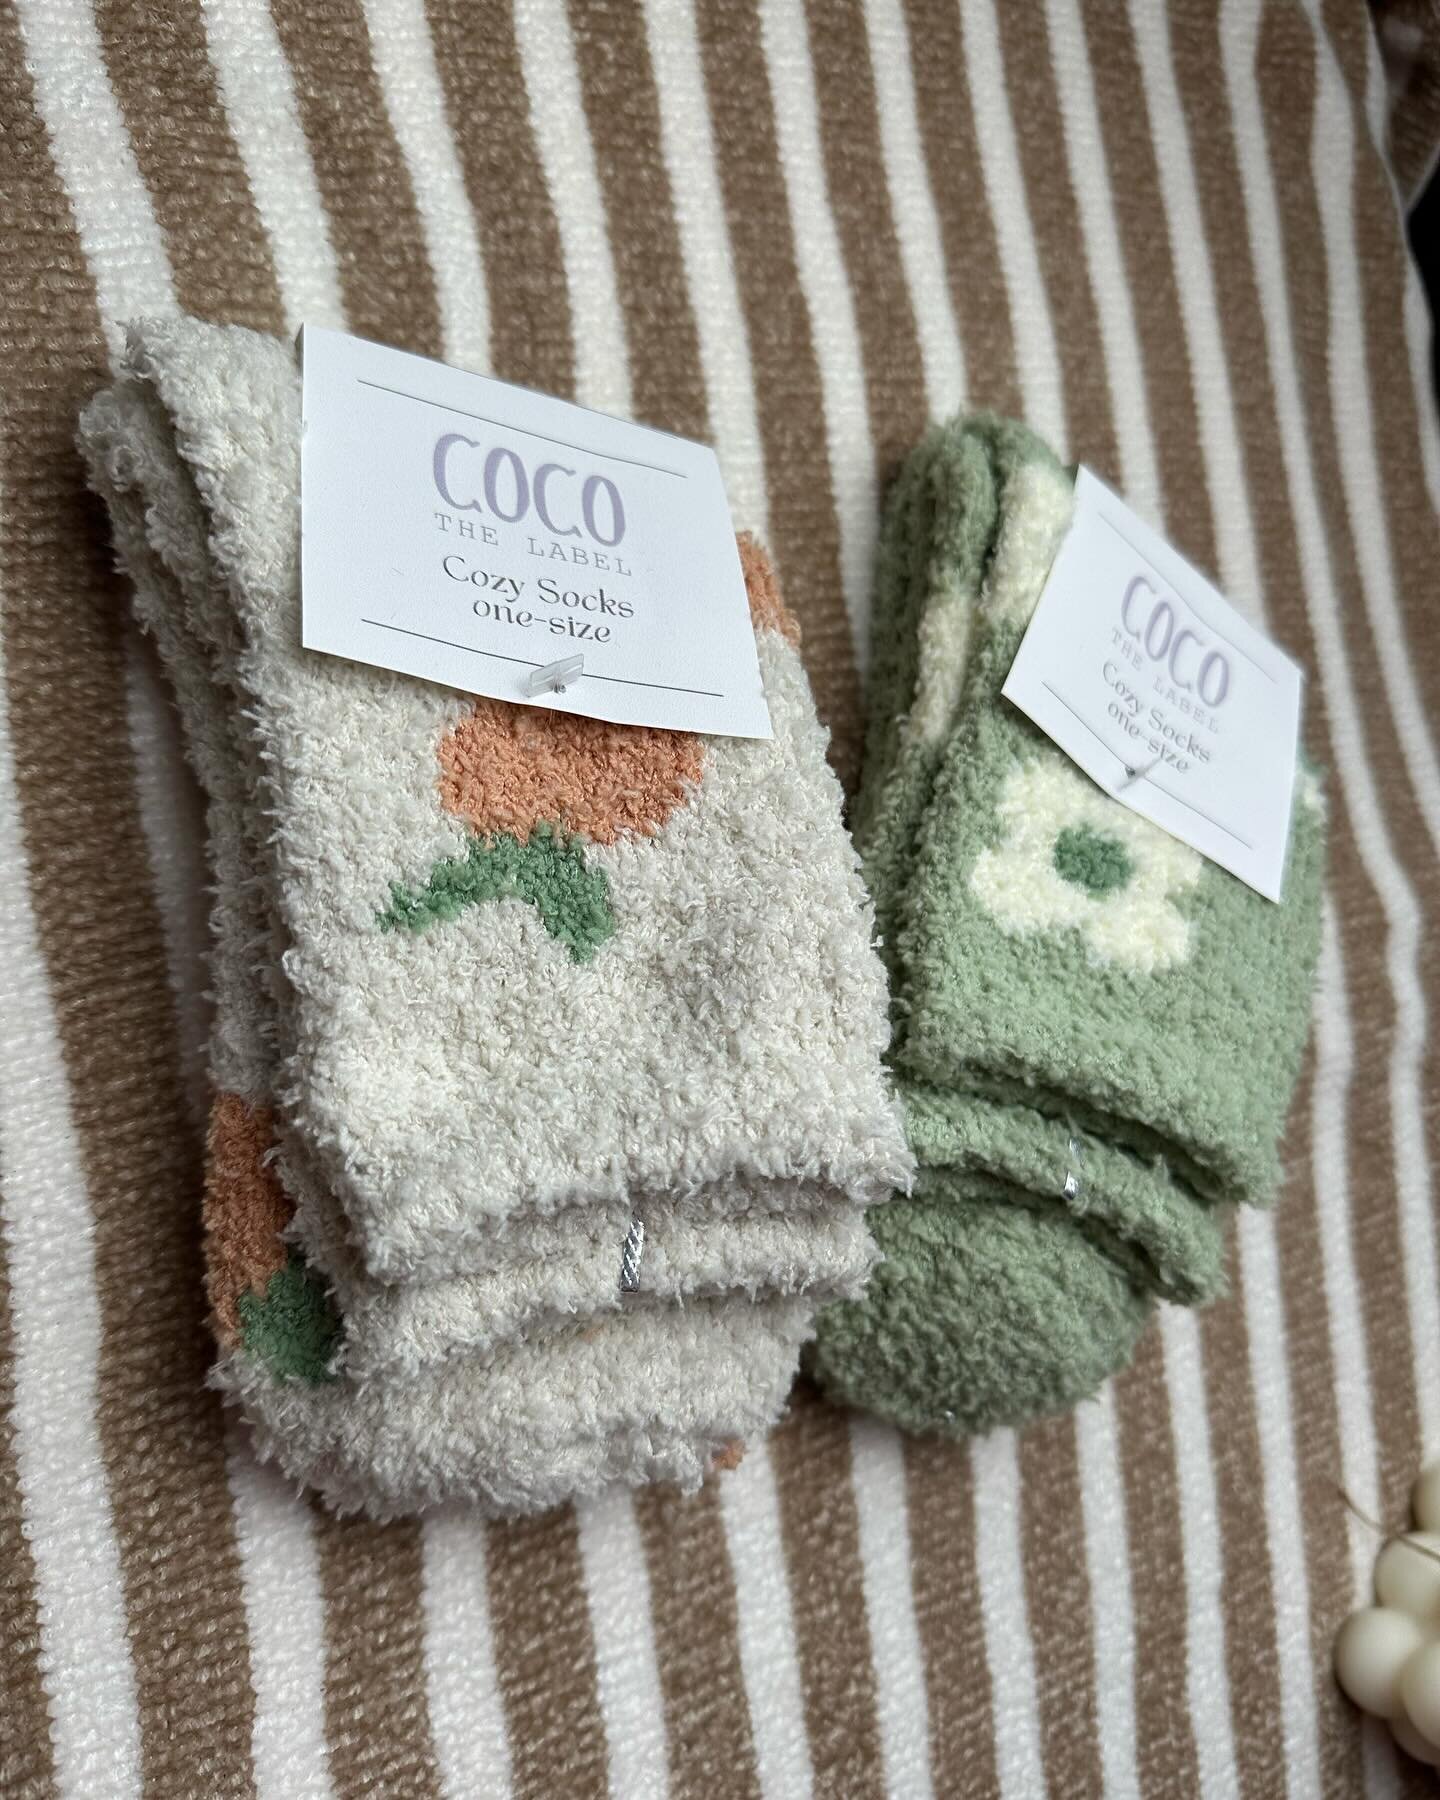 Coco The Label presents: The CUTEST &amp; SOFEST Cozy socks 🤩😆

$5 a pair

Multiple pairs in each design 😋
Comment below to claim 🛍️